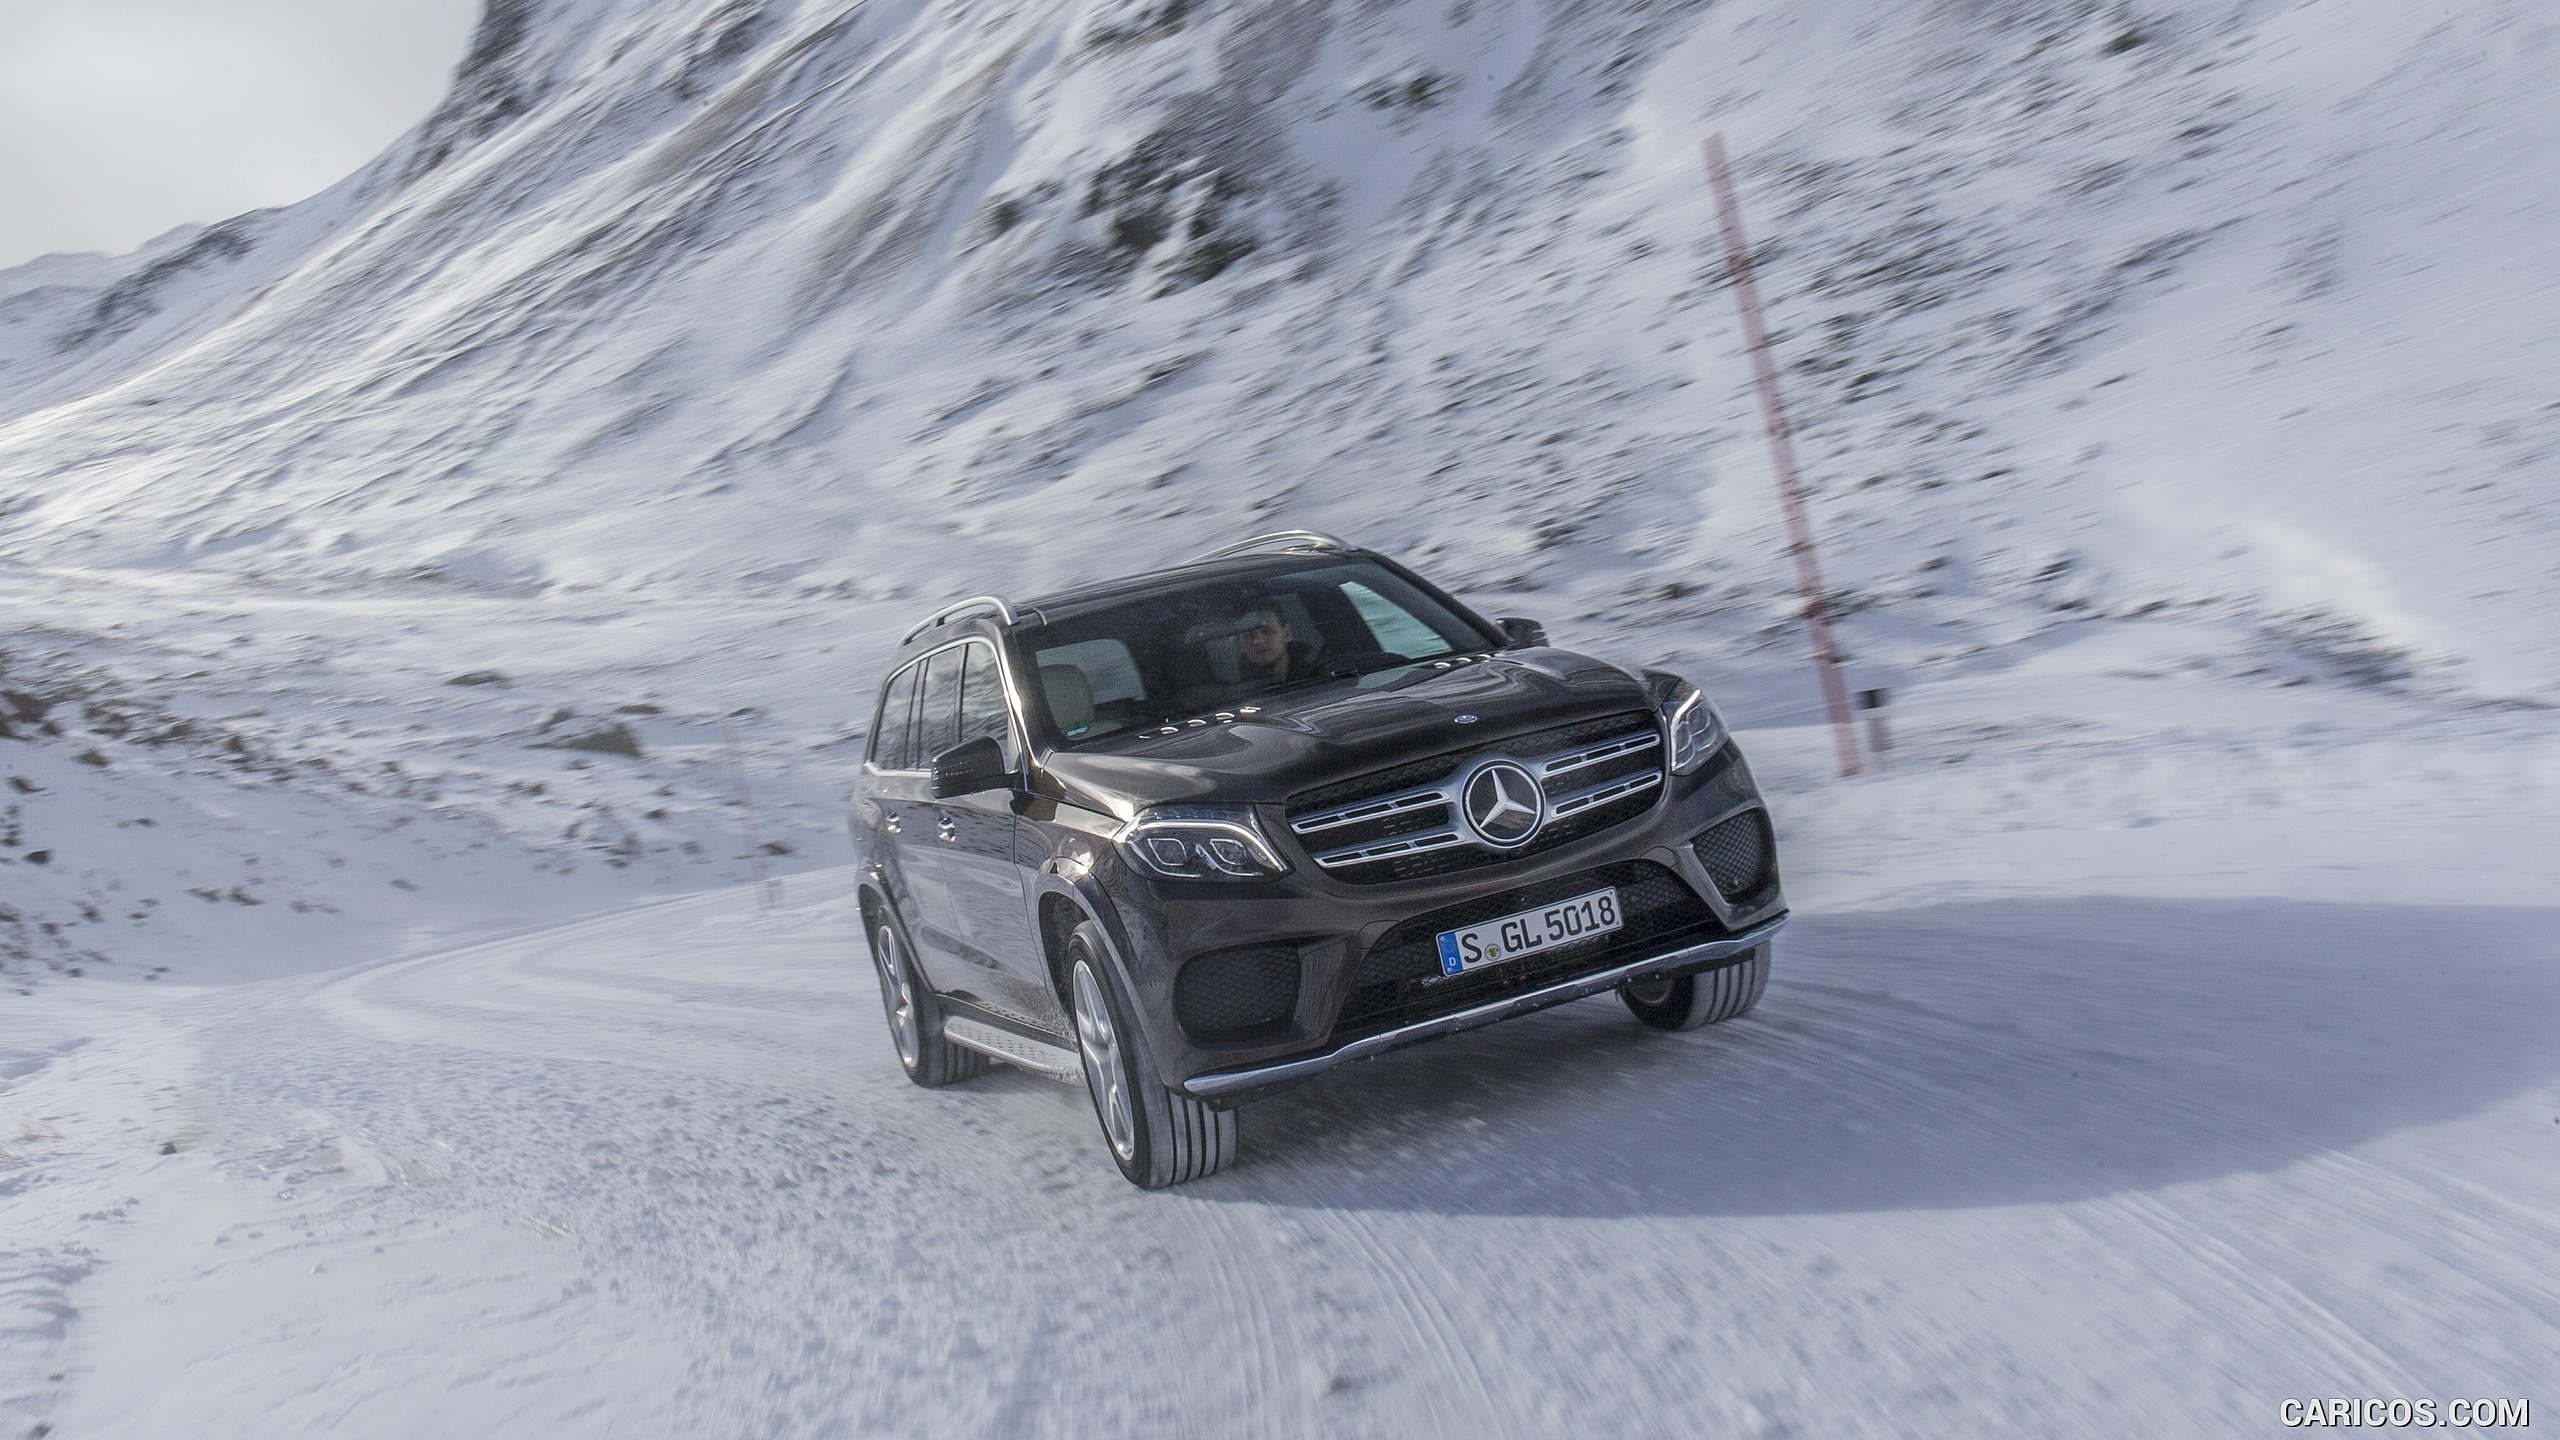 2017 Mercedes-Benz GLS 350d 4MATIC AMG Line in Snow - Front, #176 of 255